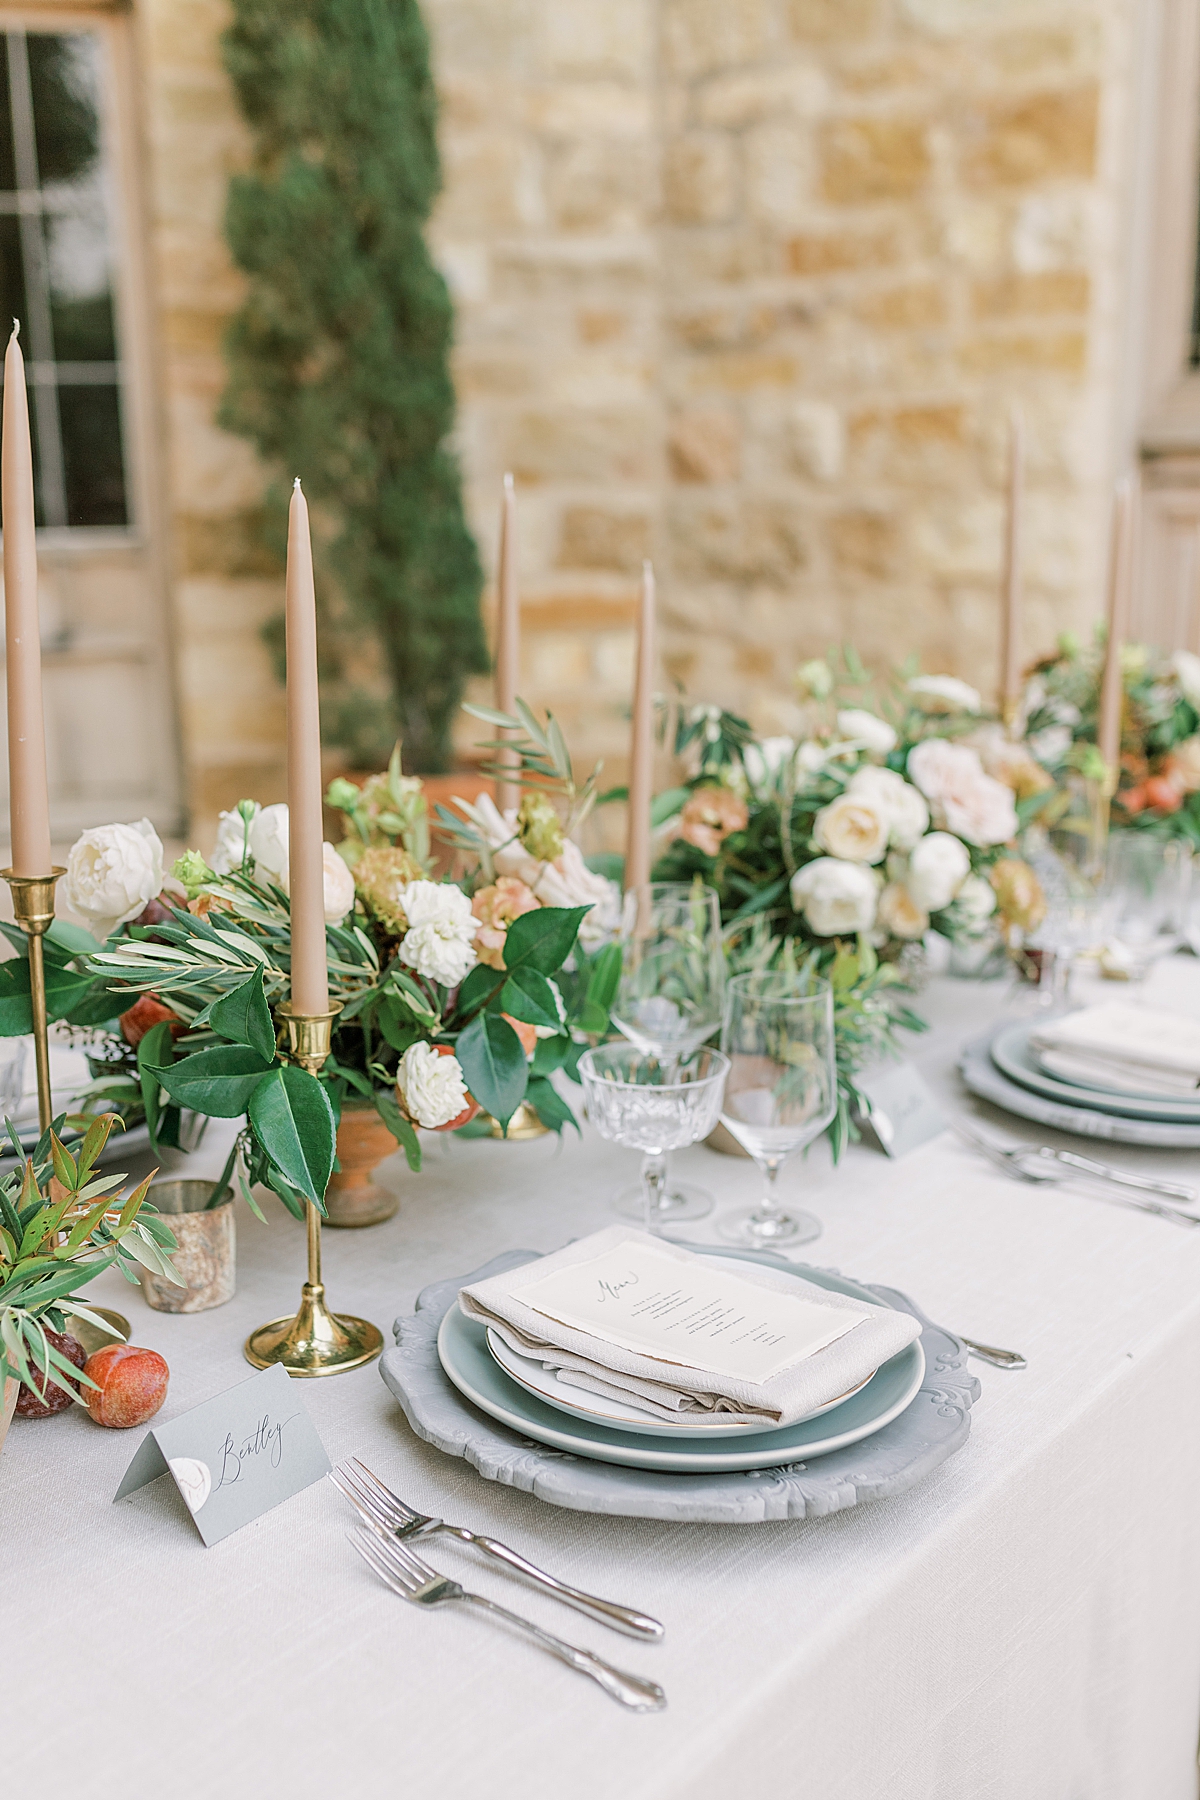 A image of the length of the reception table with multiple place settings and the Sunstone Villa walls in the background.